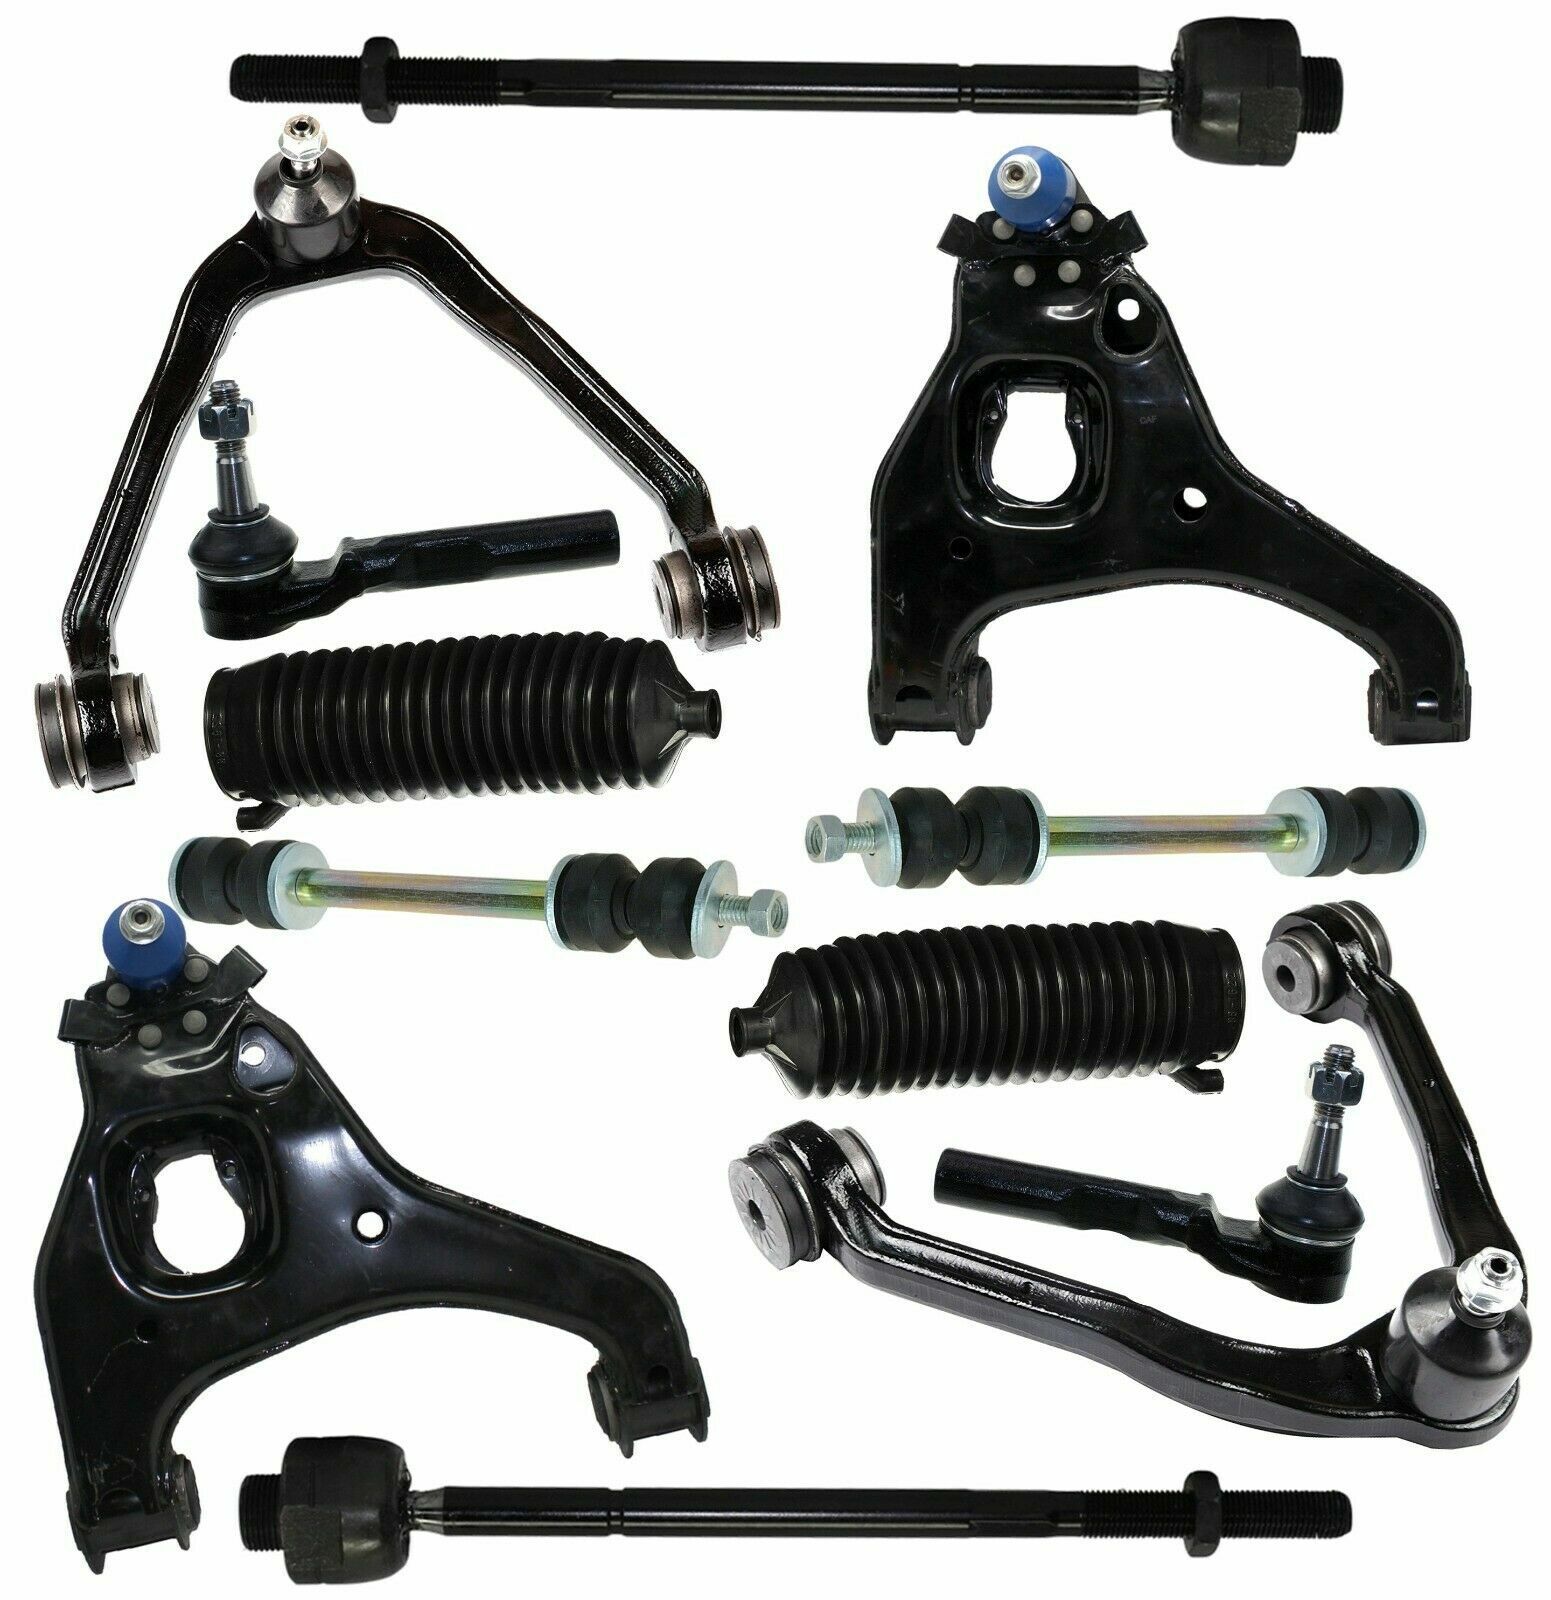 New 12 Pc Upper Lower Control Arm + Complete Suspension Kit for Silverado Sierra